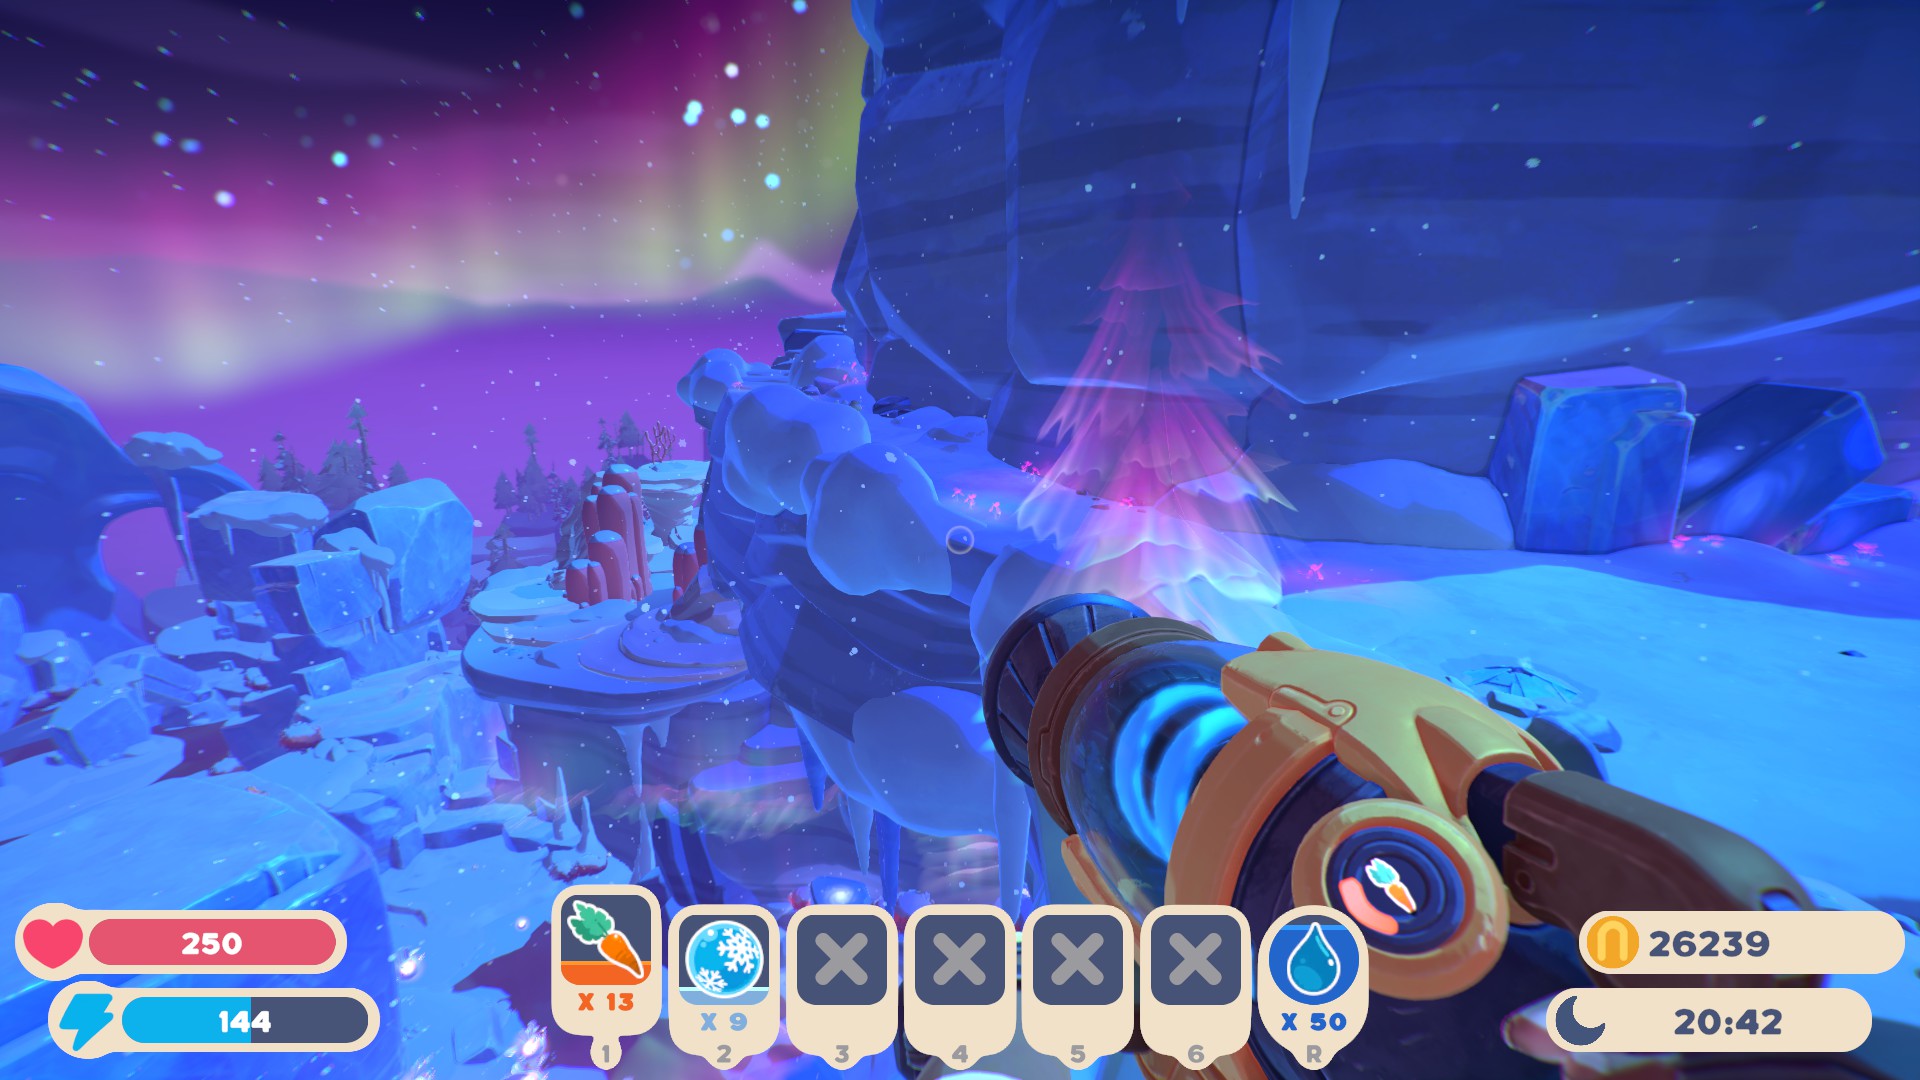 Slime Rancher 2 - Capsule Locations for Powderfall Bluffs - Pods 1 - 6 (Exterior I) - 4077202